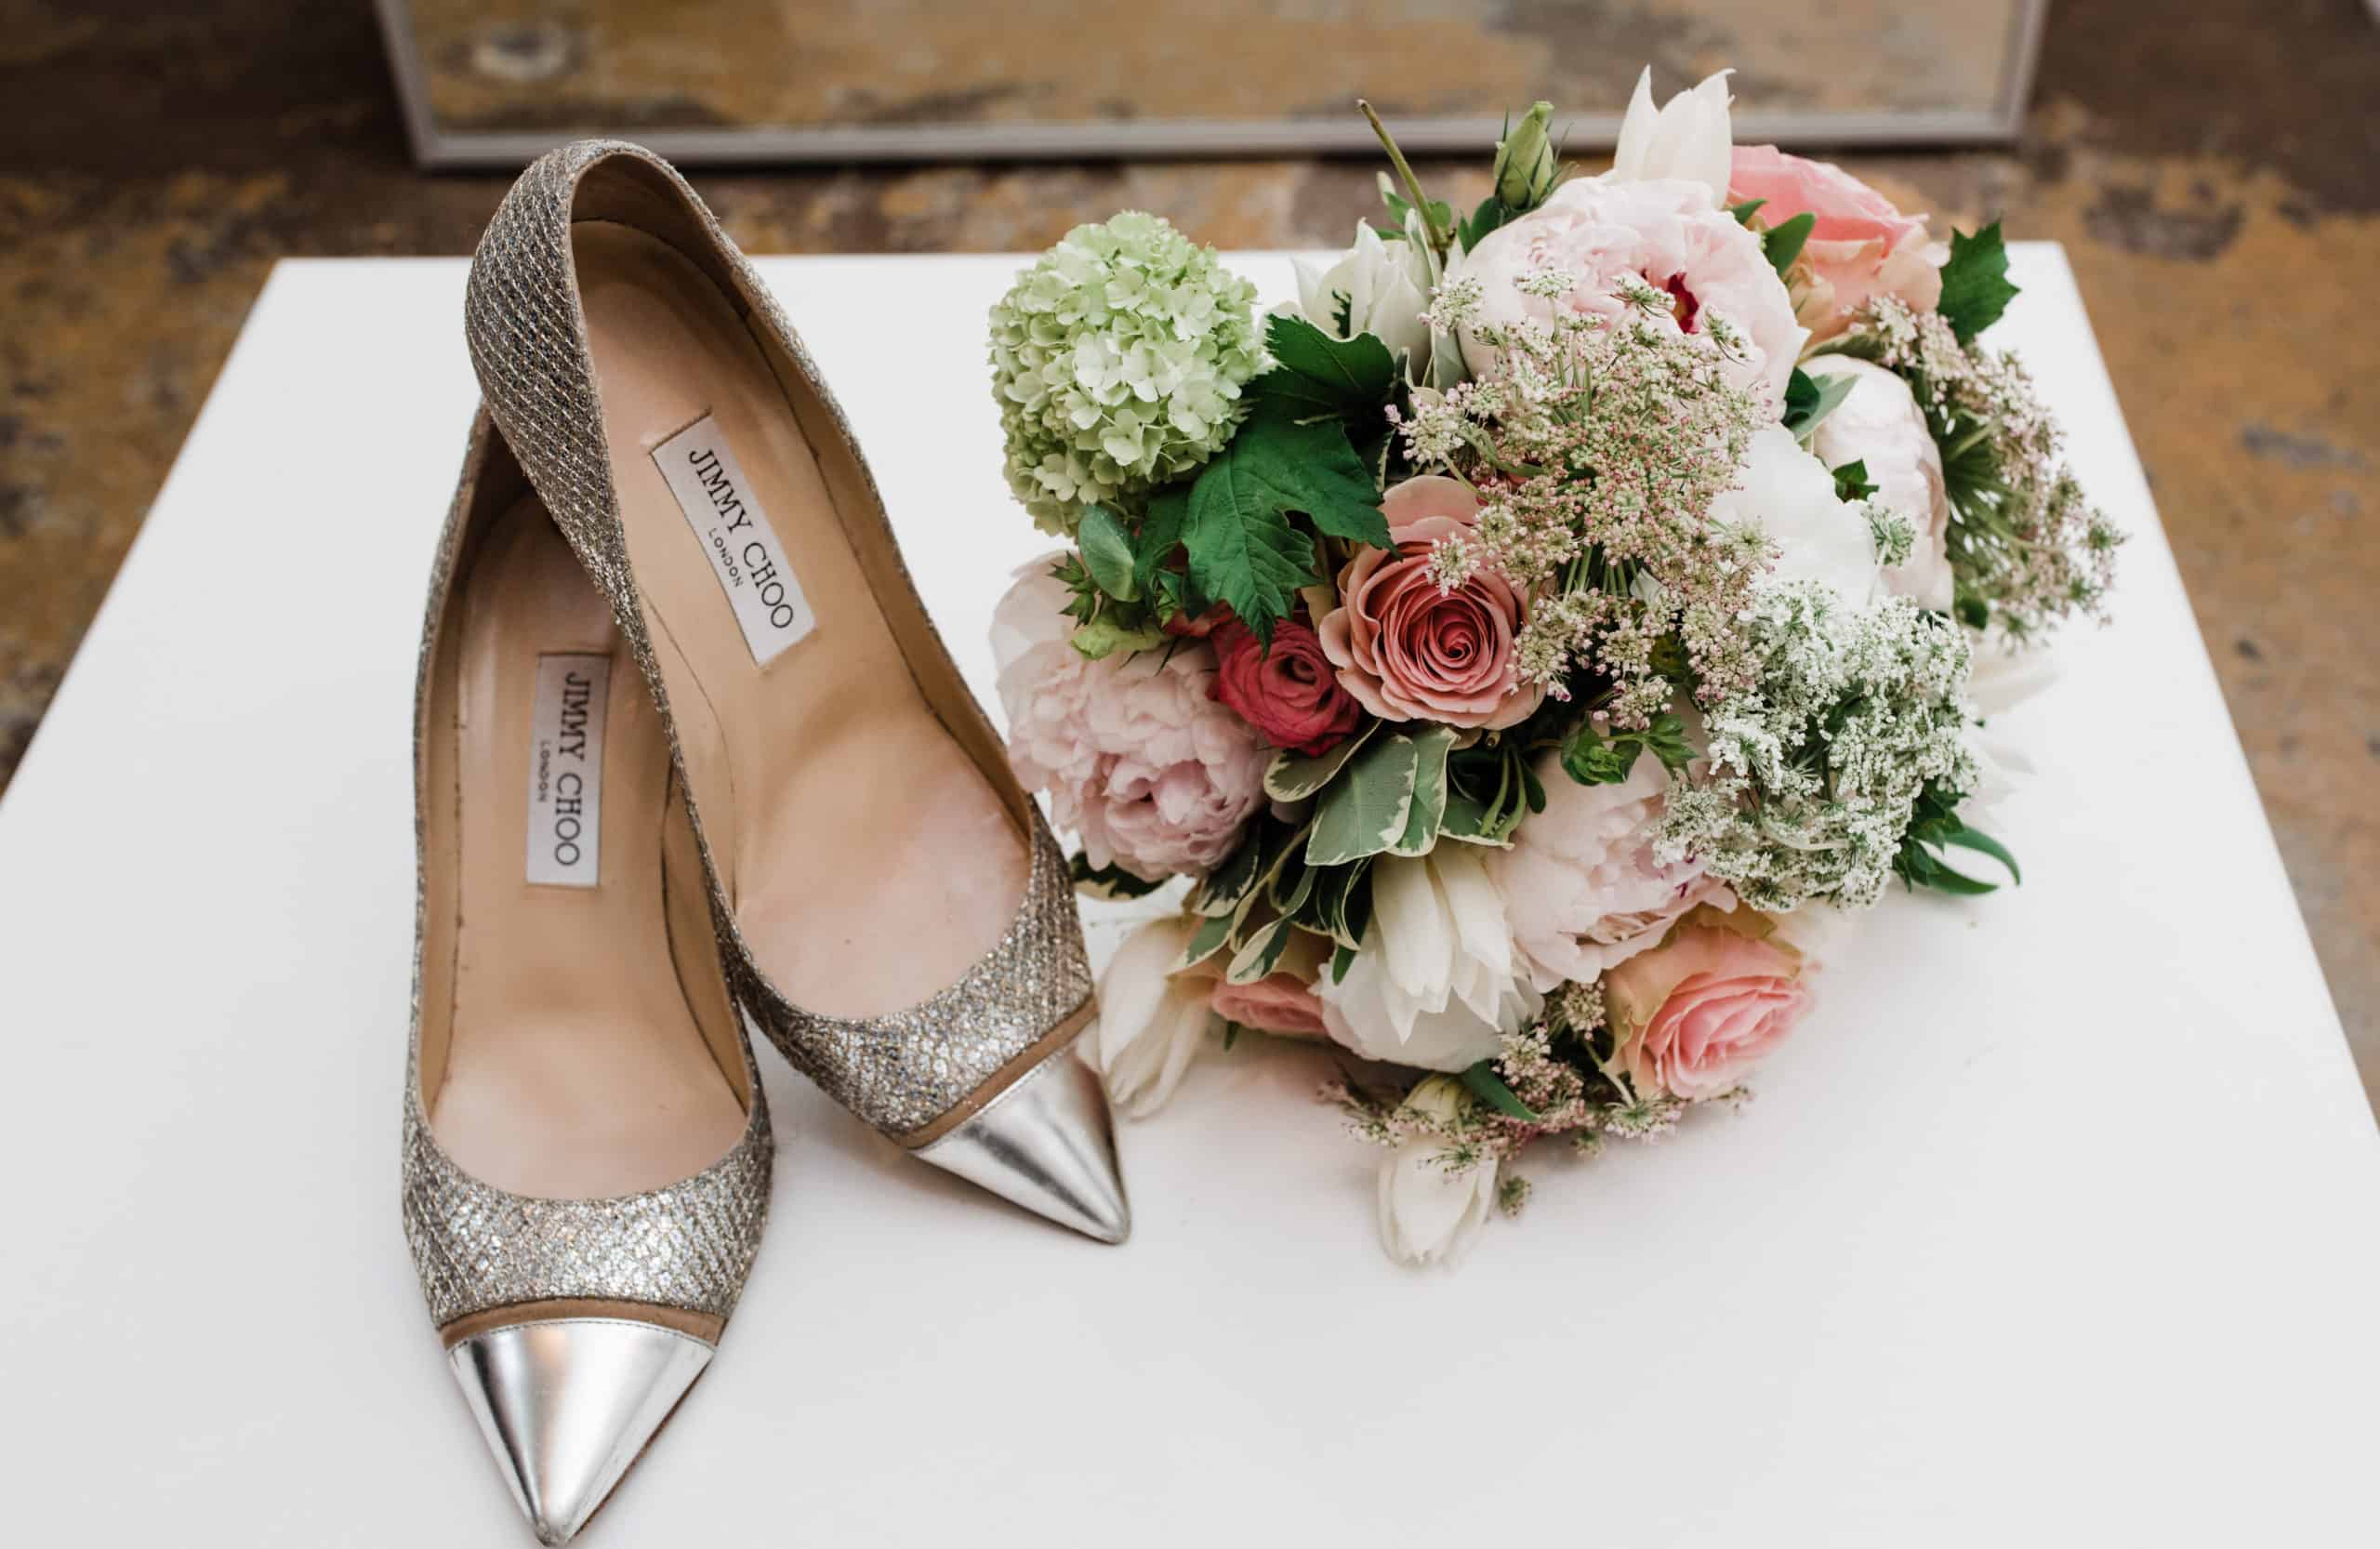 choosing-the-perfect-wedding-accessories-like-shoes-and-a-floral-bouquet